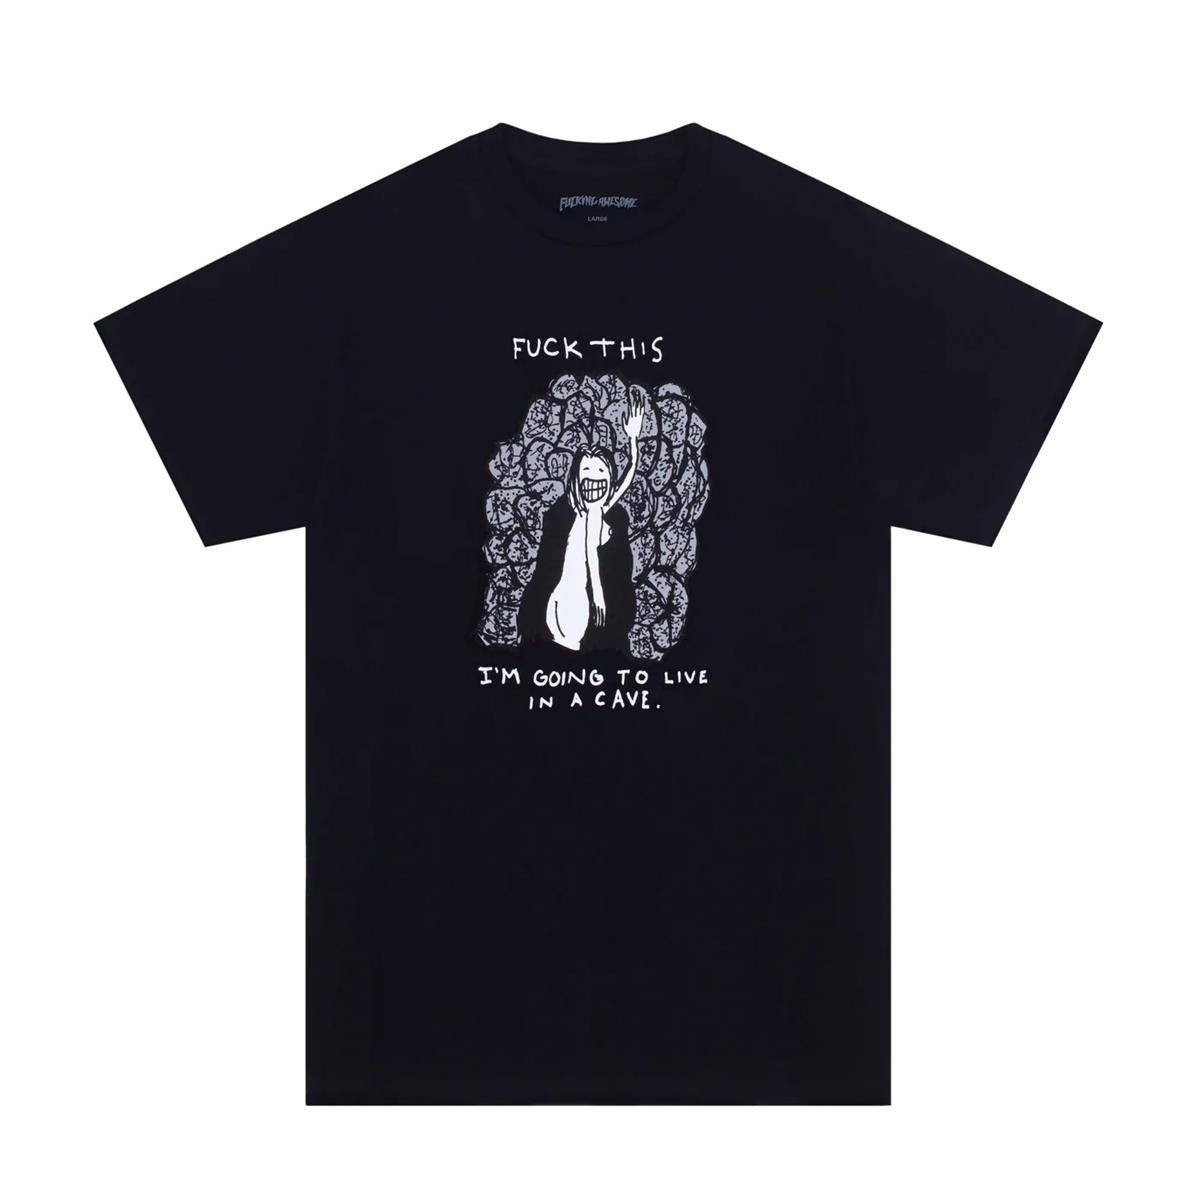 Fucking Awesome - Fuck This Tee - Black